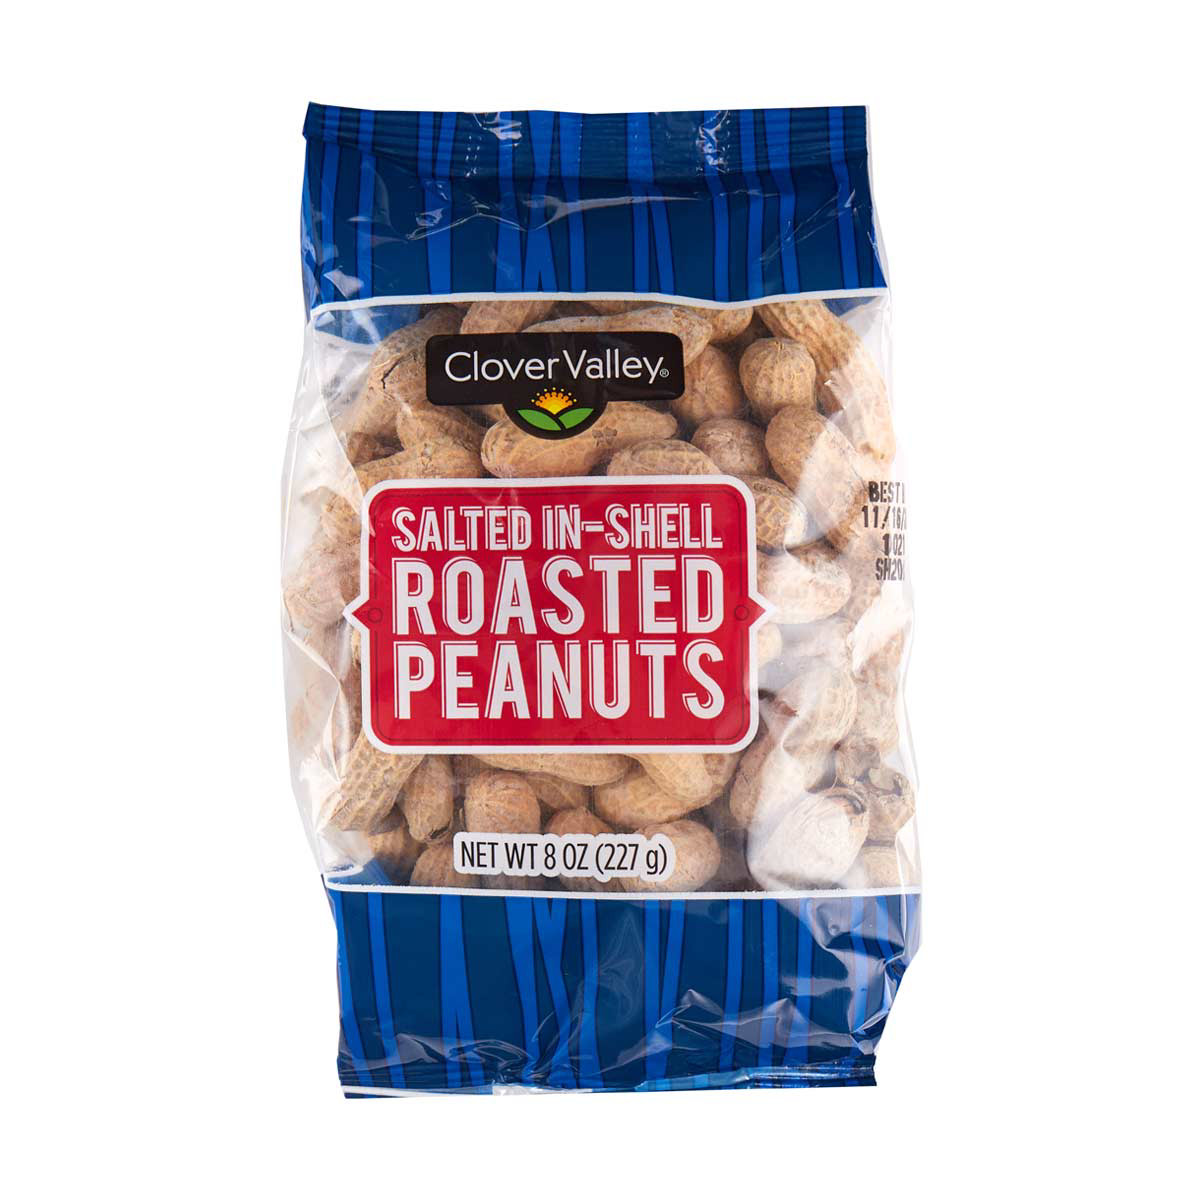 Clover Valley Salted In-Shell Roasted Peanuts, 8 oz